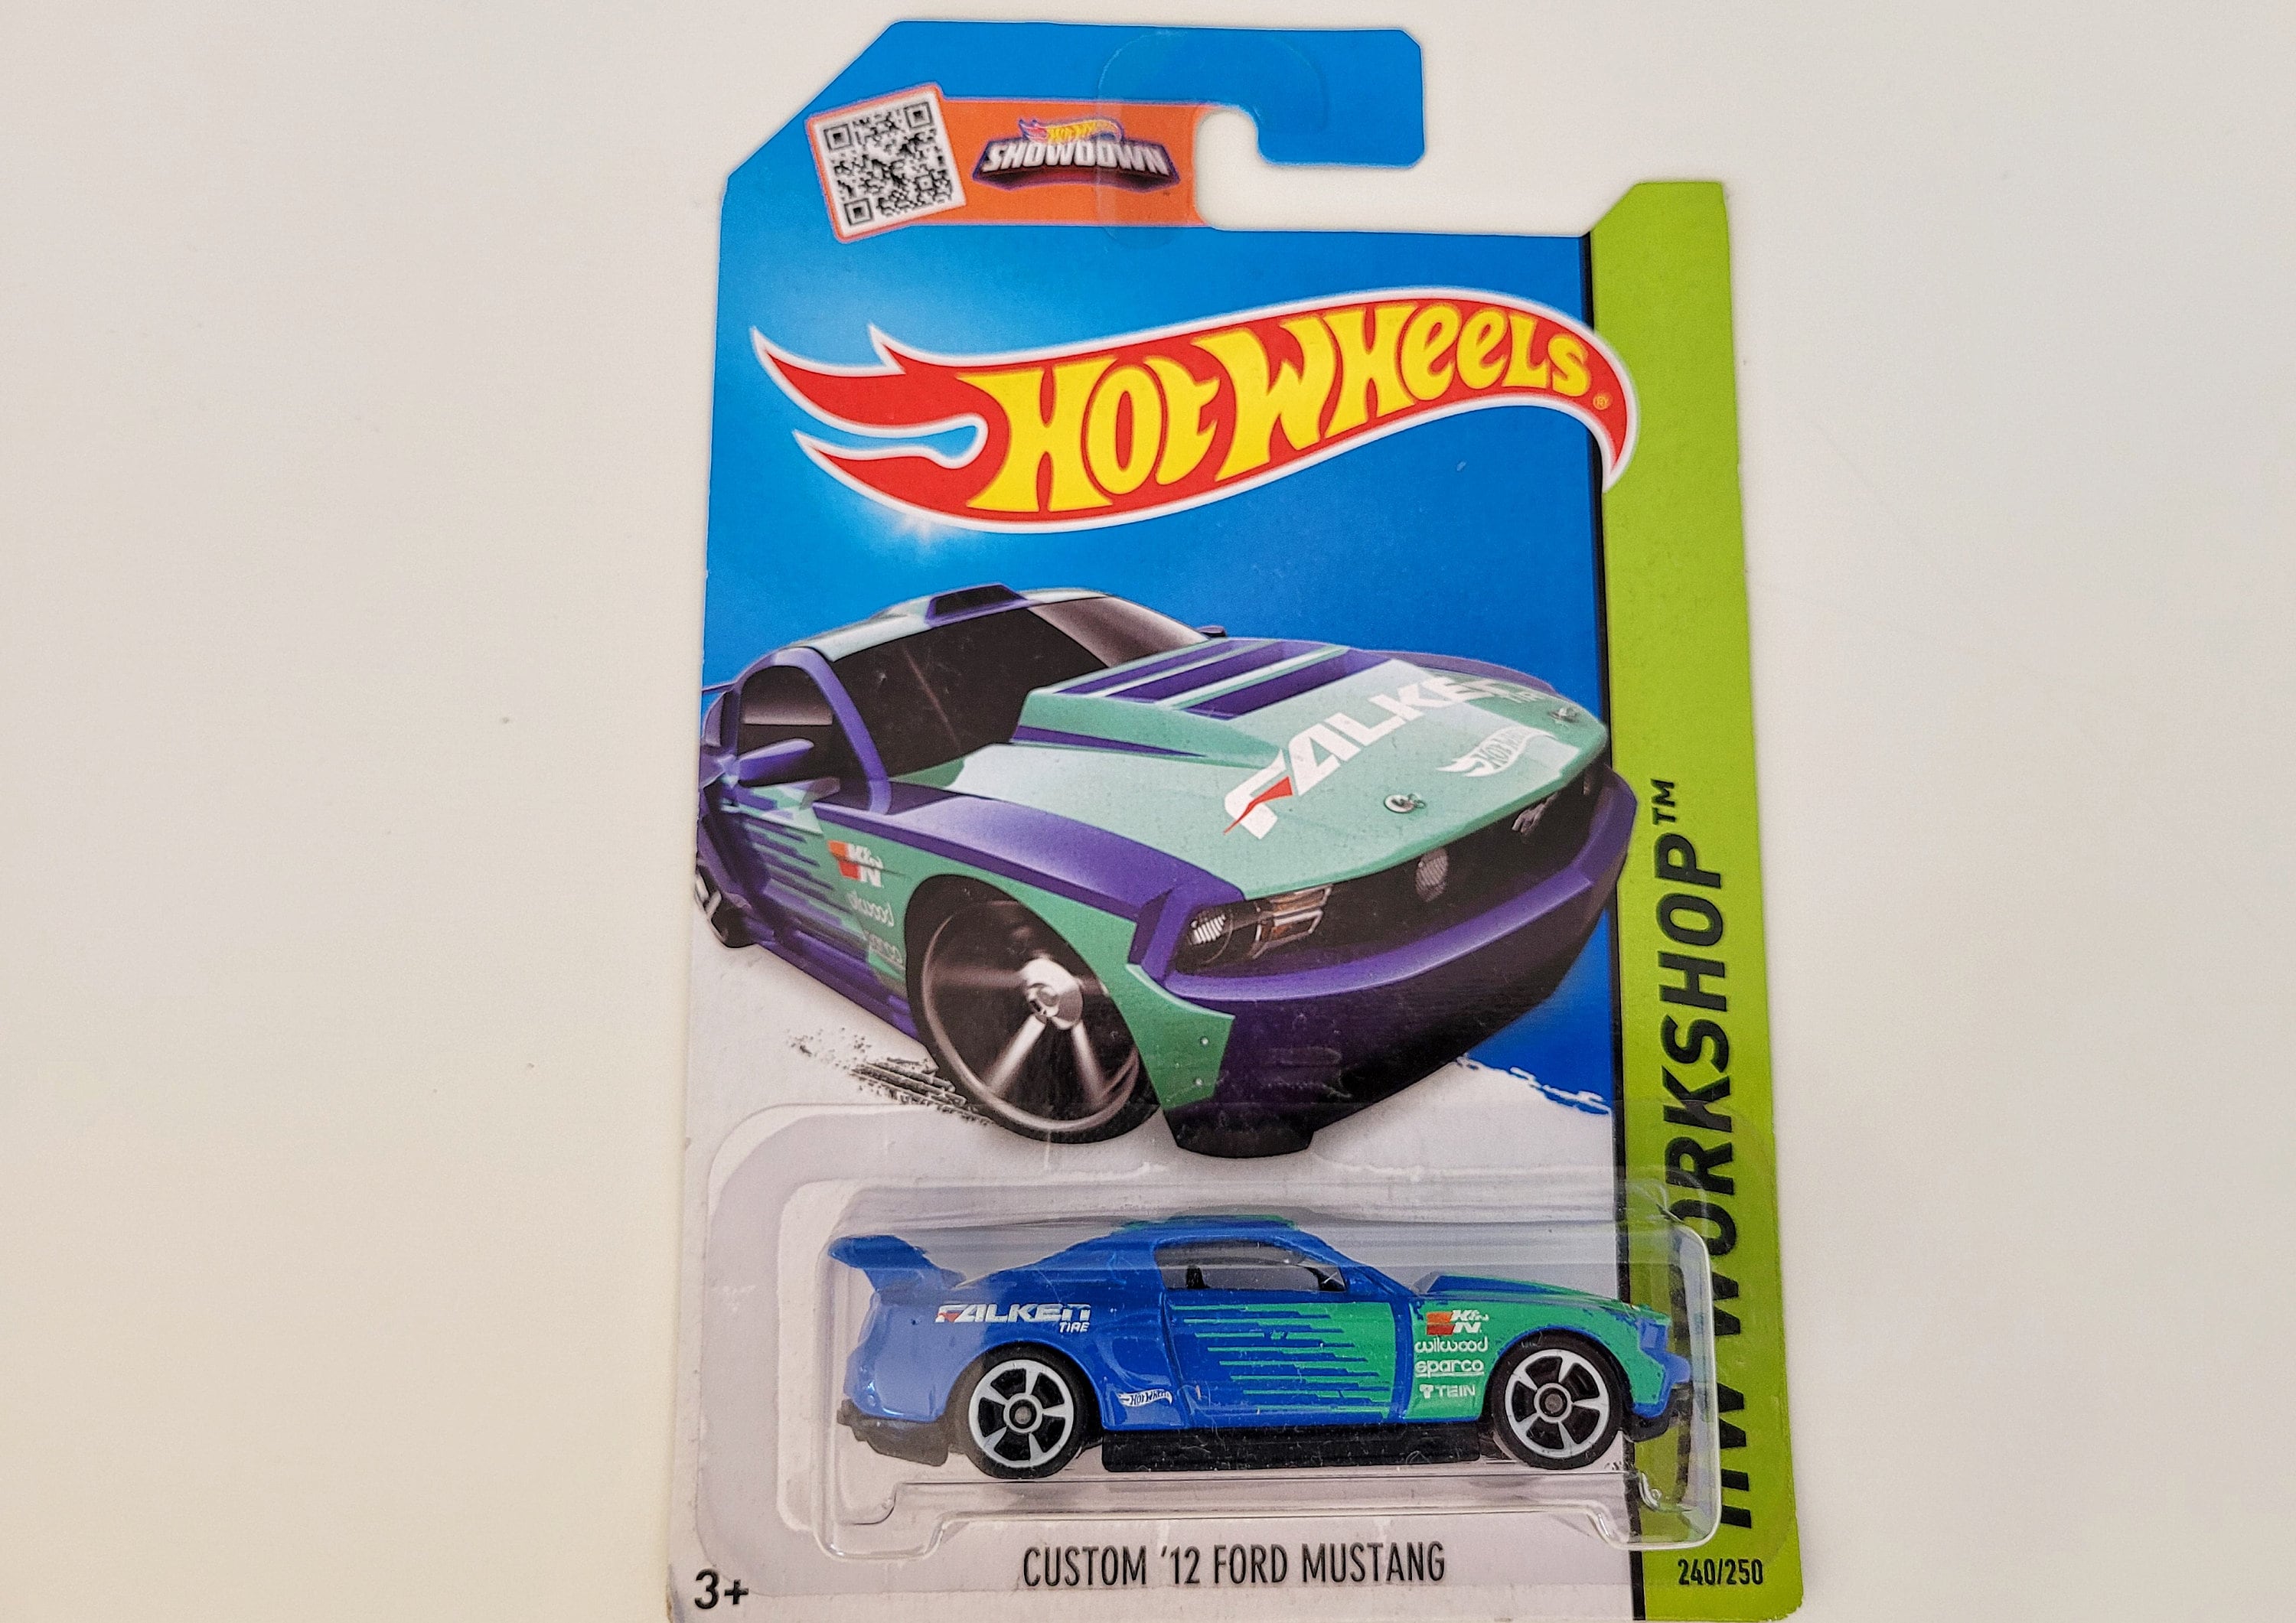 Custom 2012 Ford Mustang Hot Wheels LC Rare Collectable - Etsy